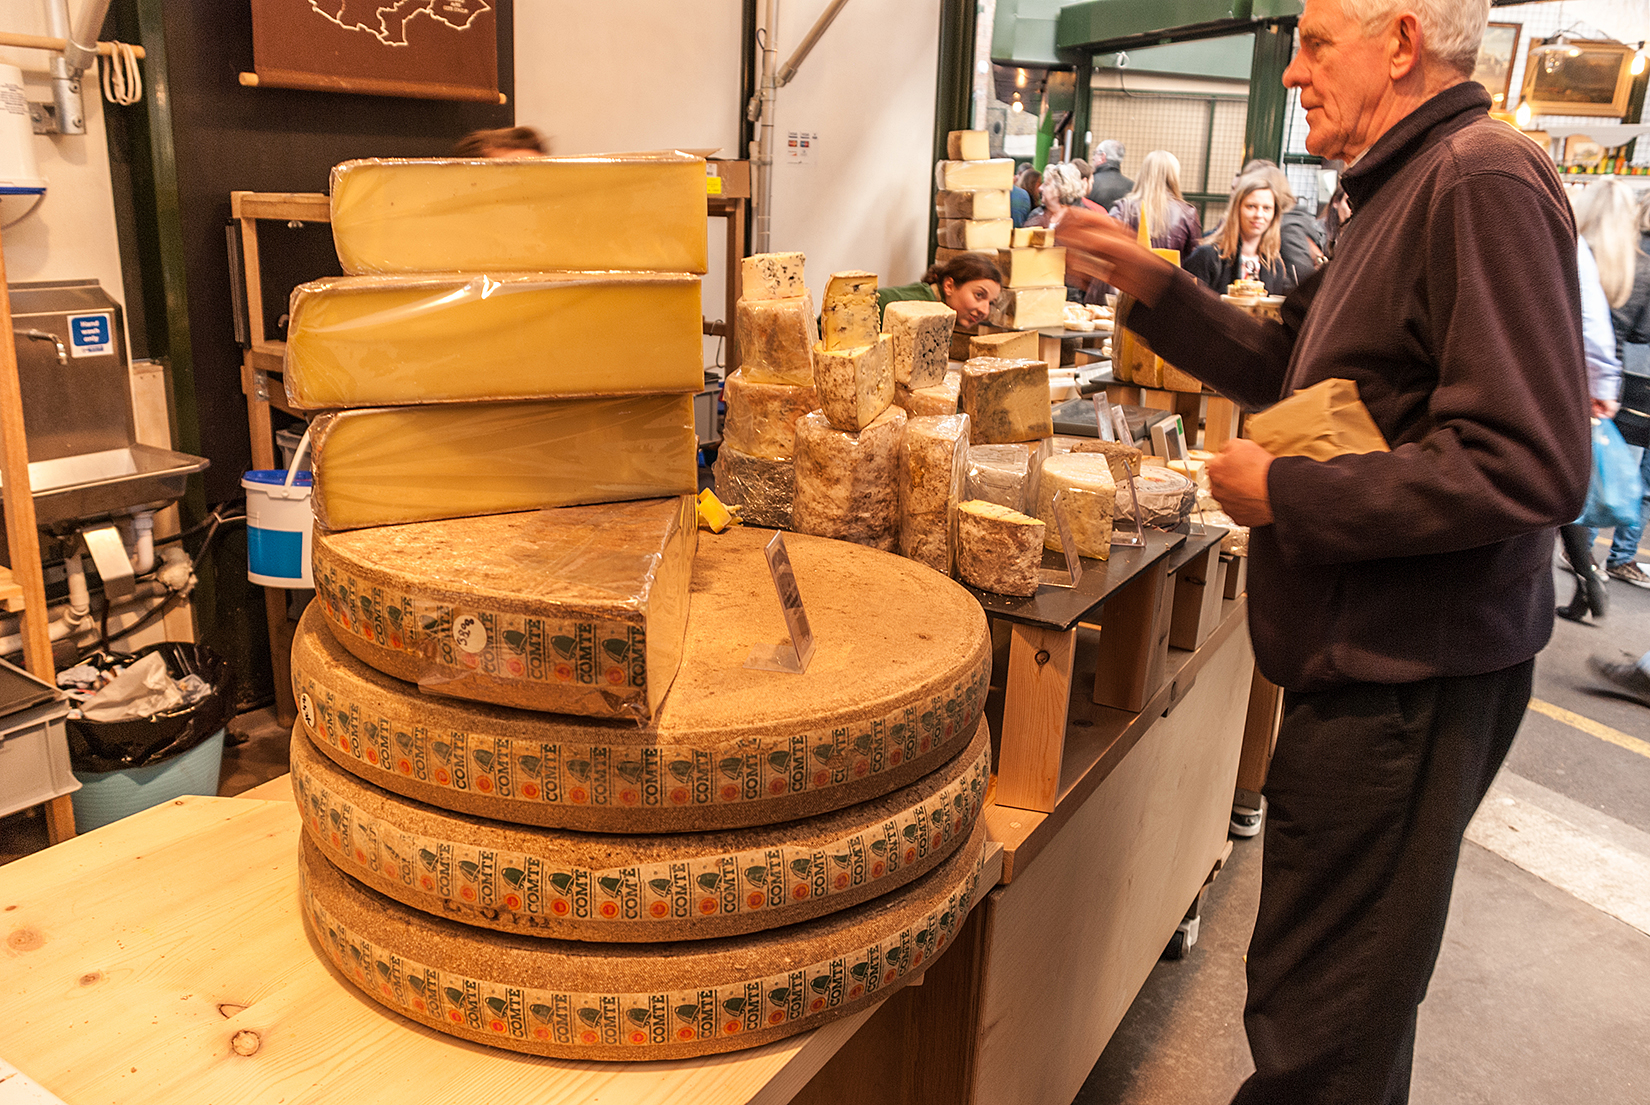 Spectacular wheels of Comté cheese produced in the Jura Massif region and matured in the 19th century Fort Saint Antoine